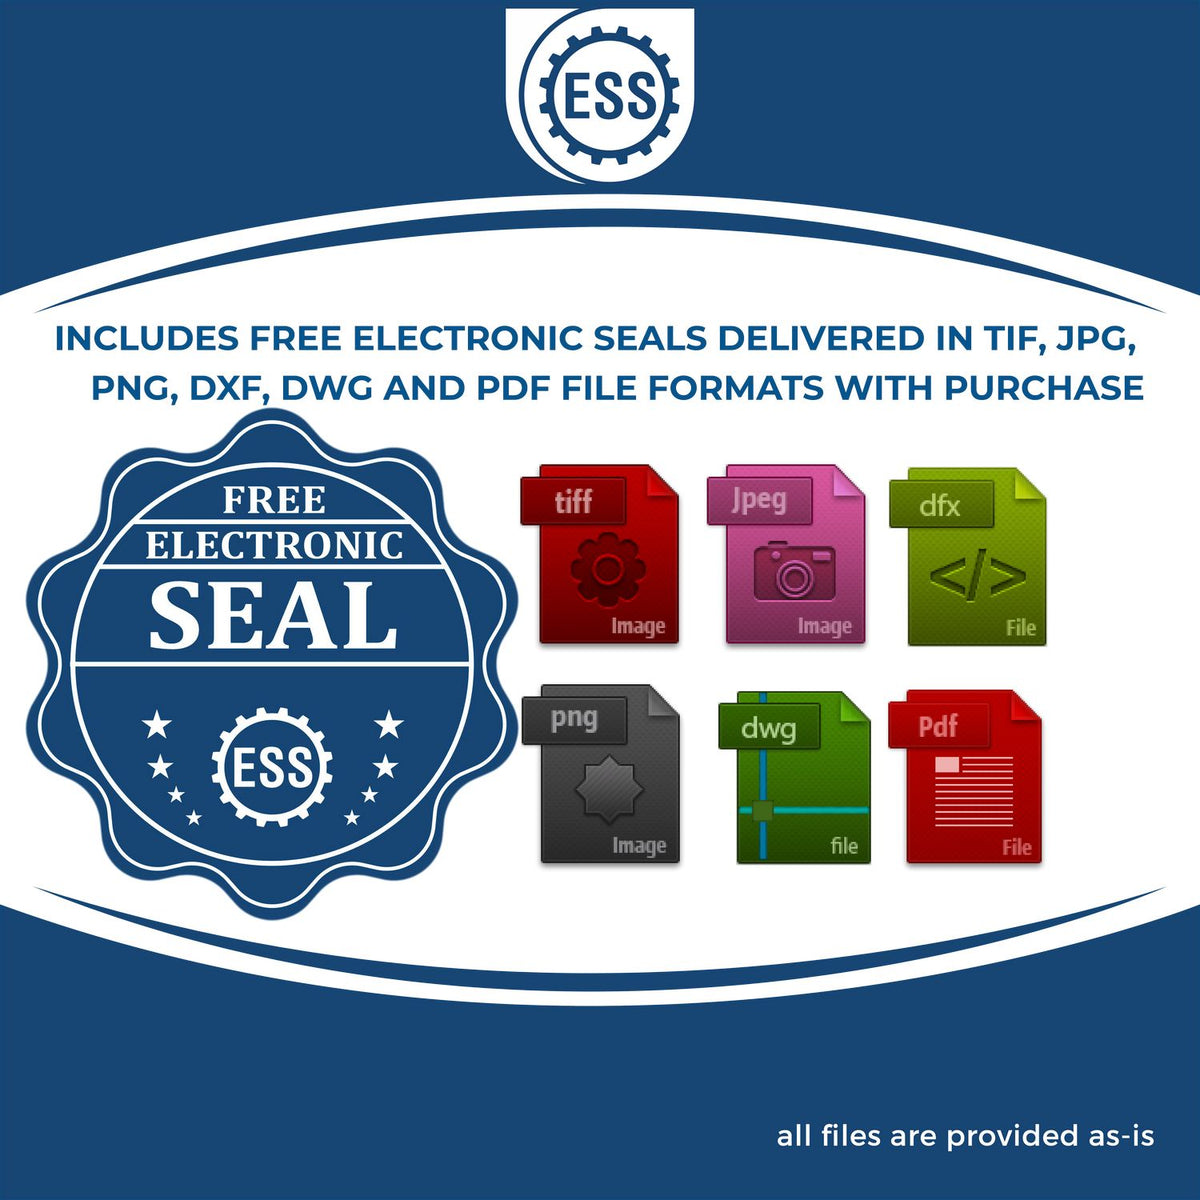 An infographic for the free electronic seal for the Long Reach Maine PE Seal illustrating the different file type icons such as DXF, DWG, TIF, JPG and PNG.